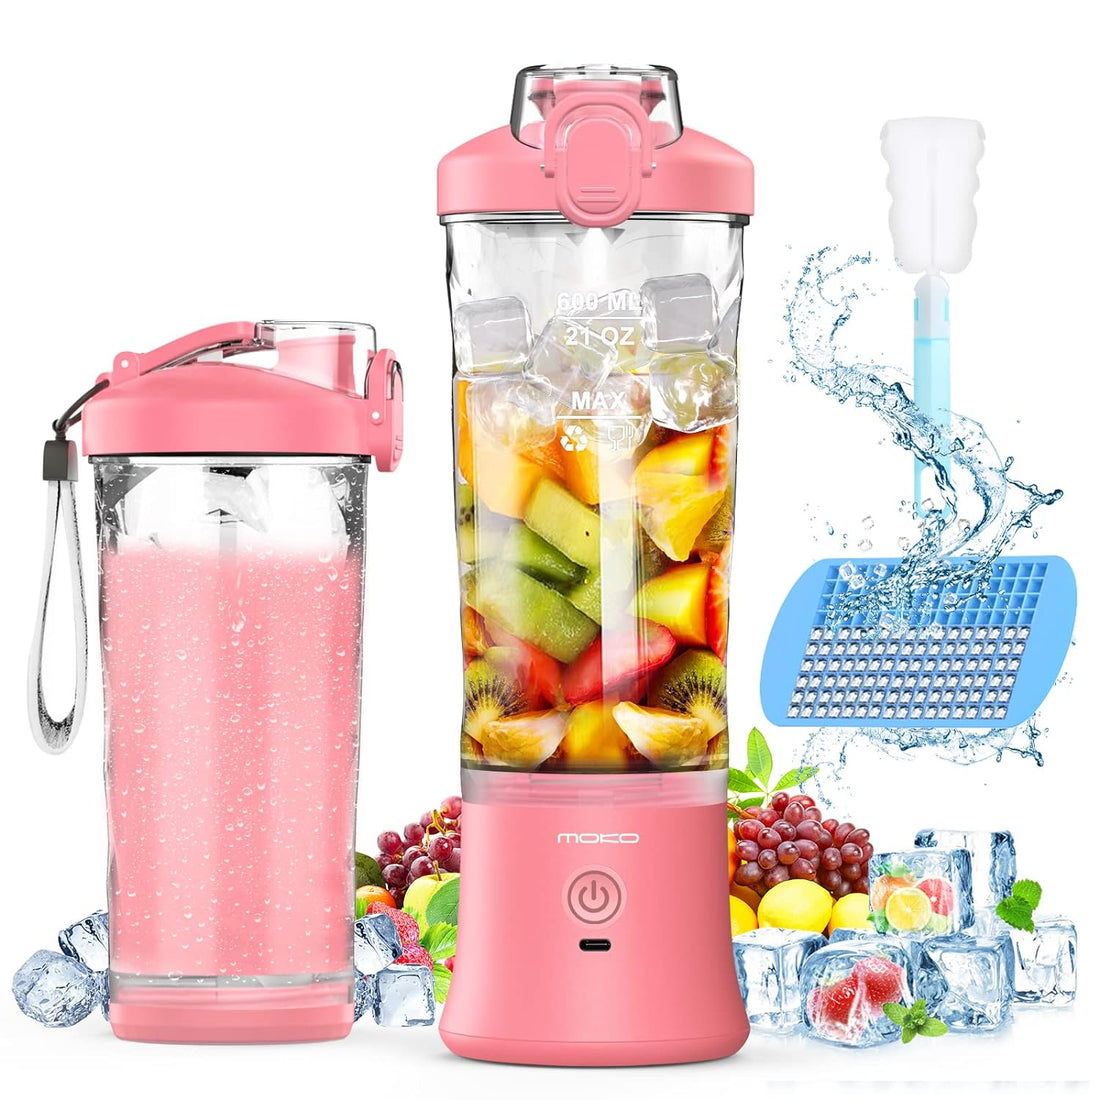 MoKo Portable Blender, 270 Watt Personal Blender for Shakes and Smoothies,21OZ Personal Blender USB Rechargeable with 6 Blades, BRA Free, Smoothie Blender for Kitchen Sports Travel and Outdoors, Pink